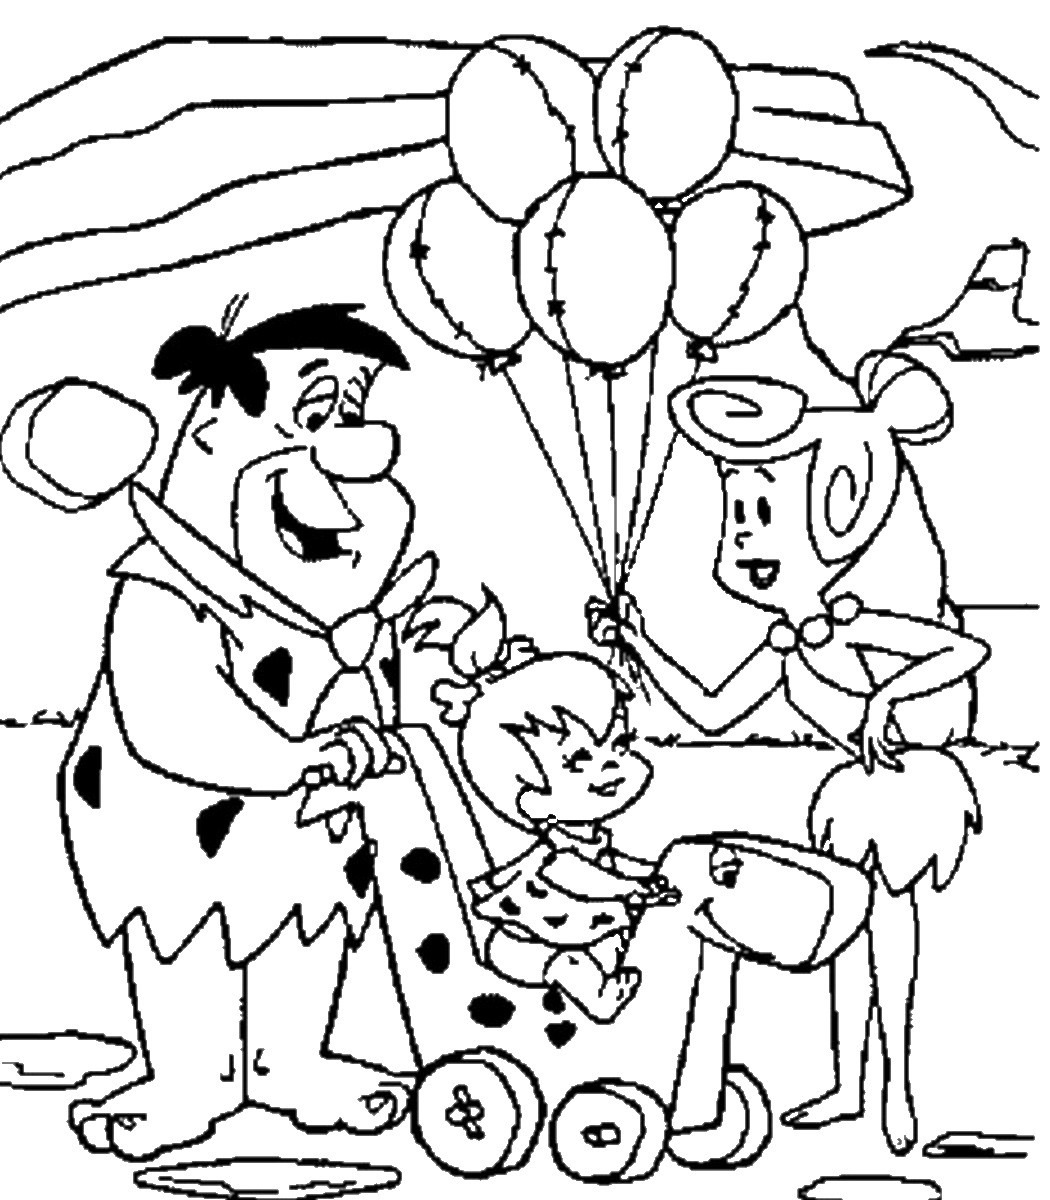 Coloring Sheet Free Printable
 The Flintstones Coloring Pages